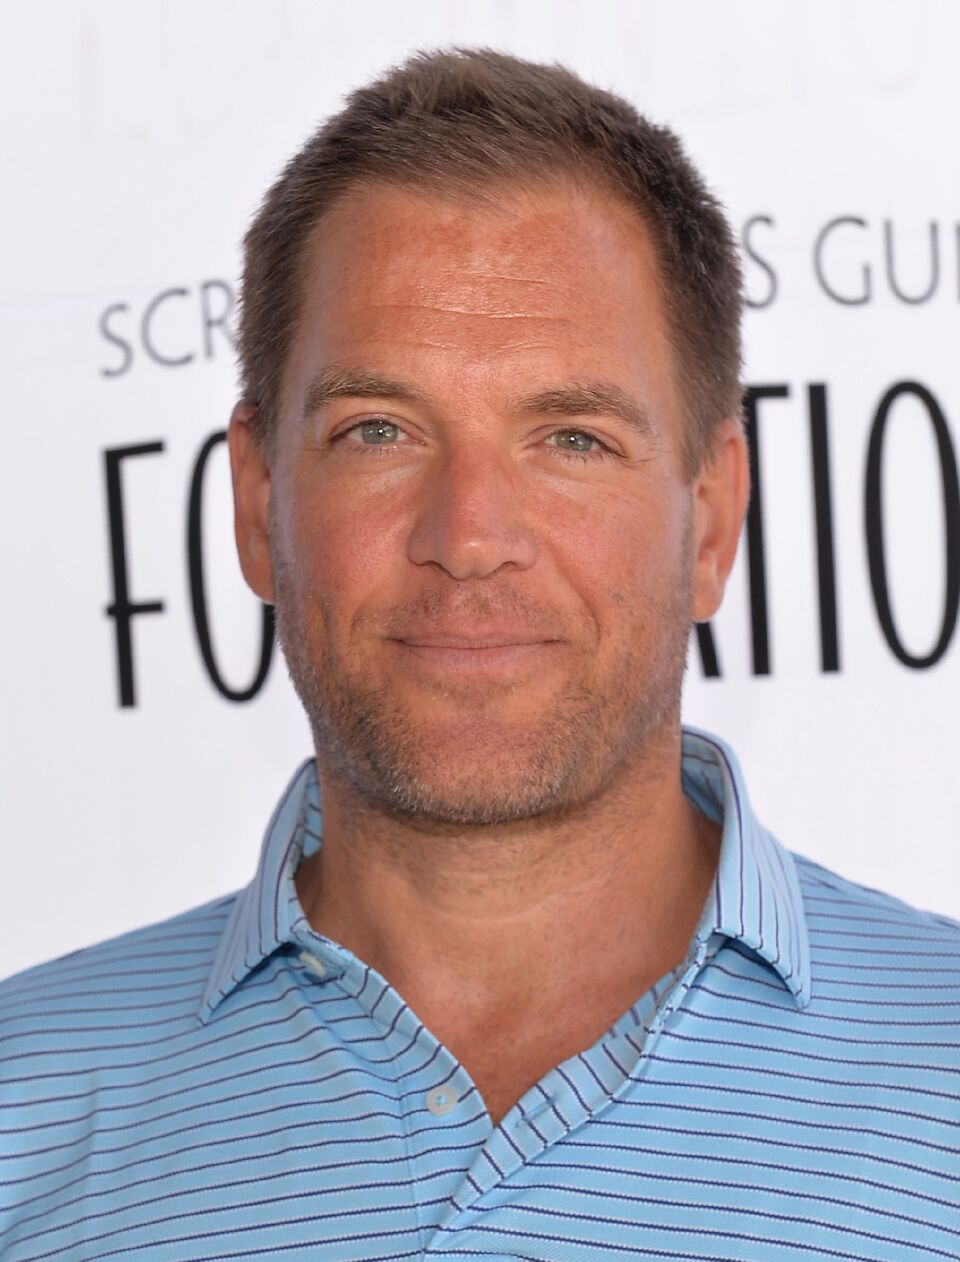 Michael Weatherly attends the Screen Actor's Guild Foundation's 5th Annual "Actors Fore Actors" Los Angeles Golf Classic at Lakeside Golf Club on June 9, 2014 in Burbank, California | Photo: Getty Images